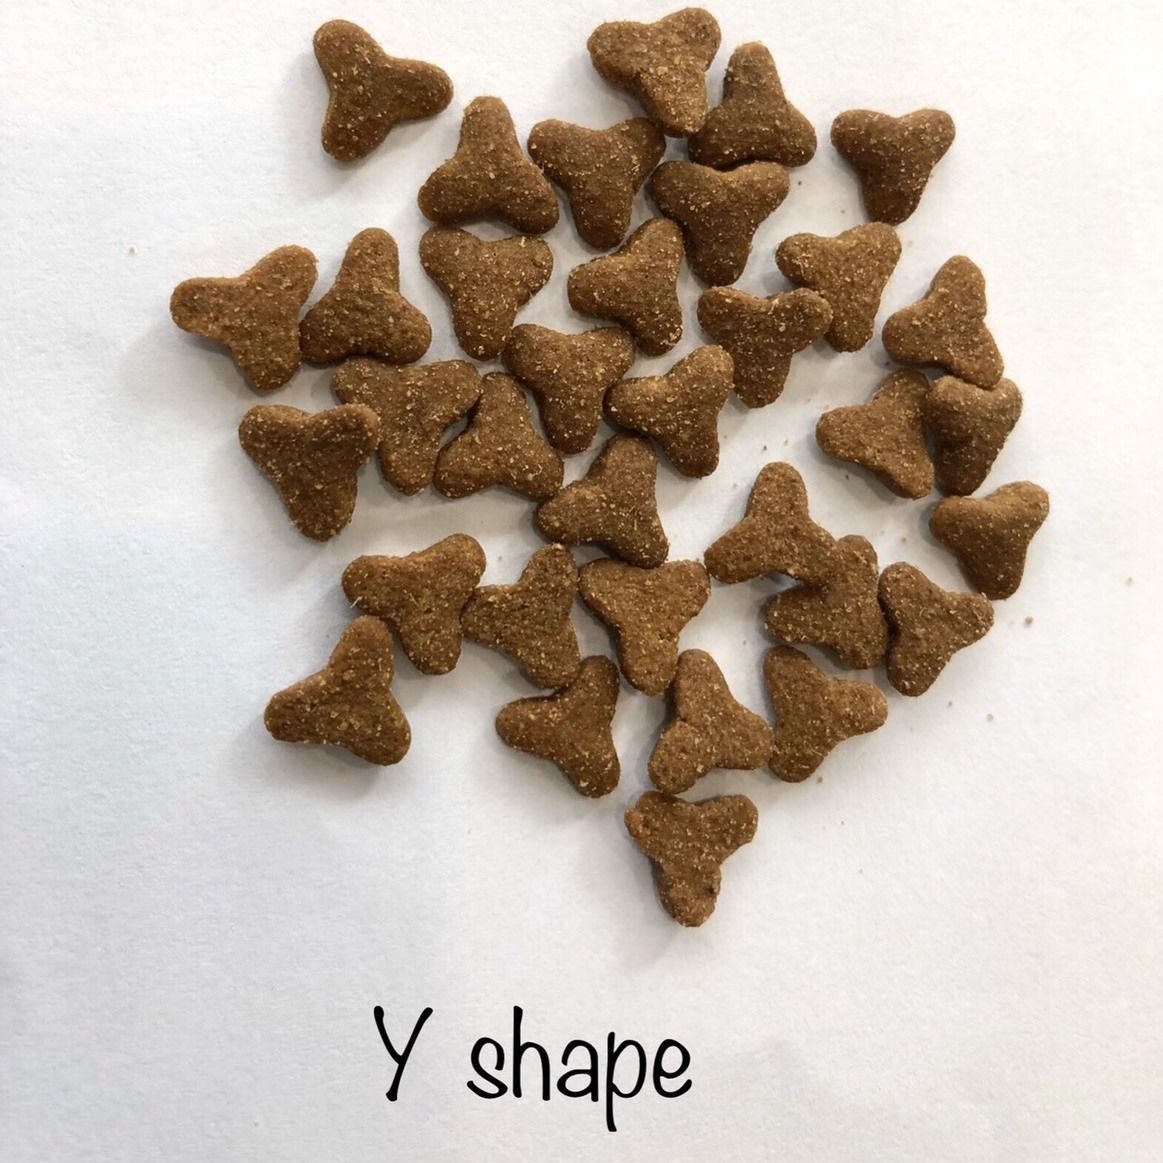 Thailand dog feeddog food Puppy and small dog breeds Weight : 500 g , 1 kg , 3.5 kg , 20 kg Guaranteed analysis ; Protein 26% Fat 7% Fiber 5% Moisture 10% All our product is made with high quality ing